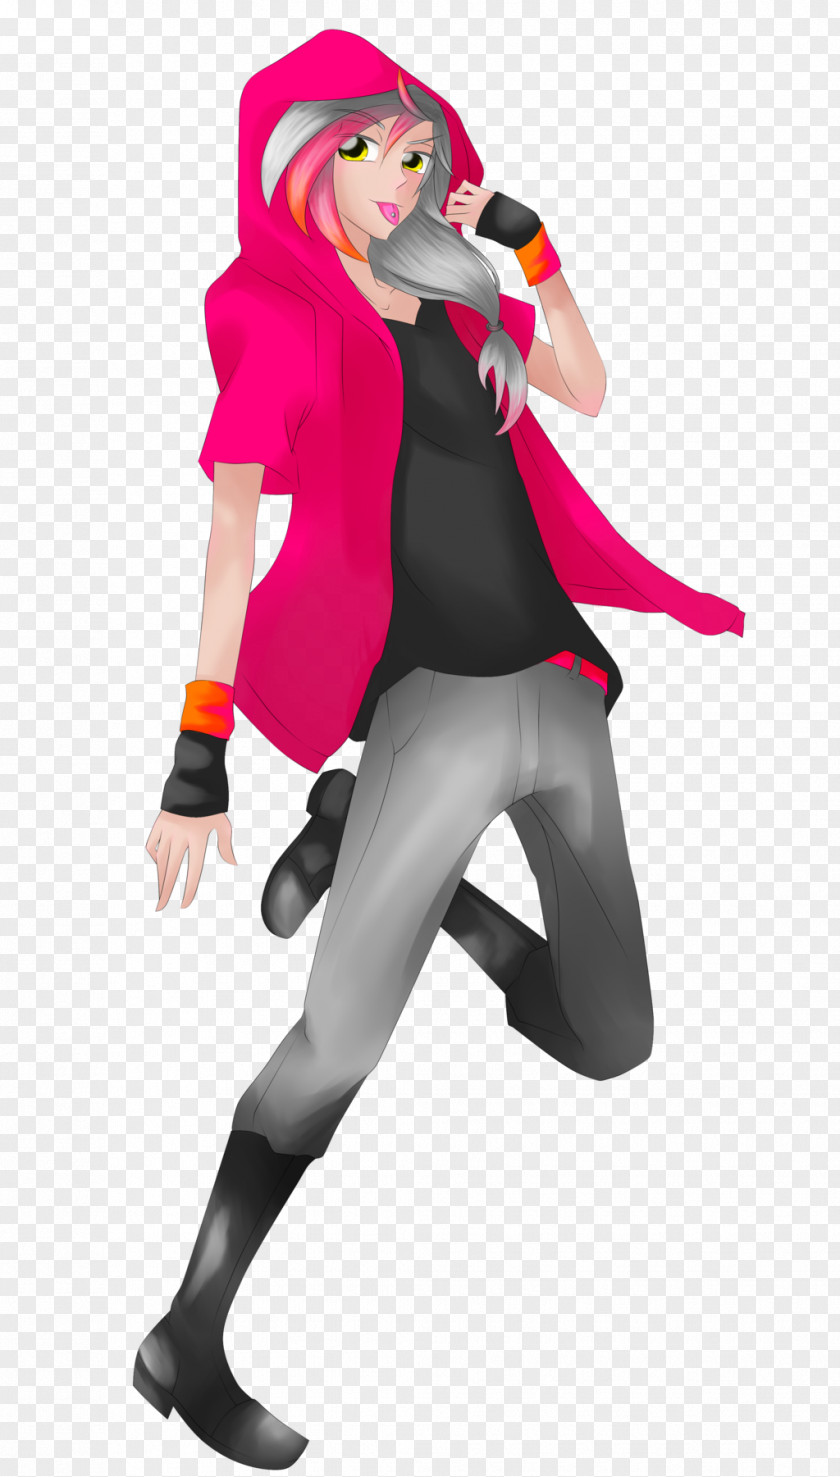 Nigth Cartoon Pink M Costume Character PNG